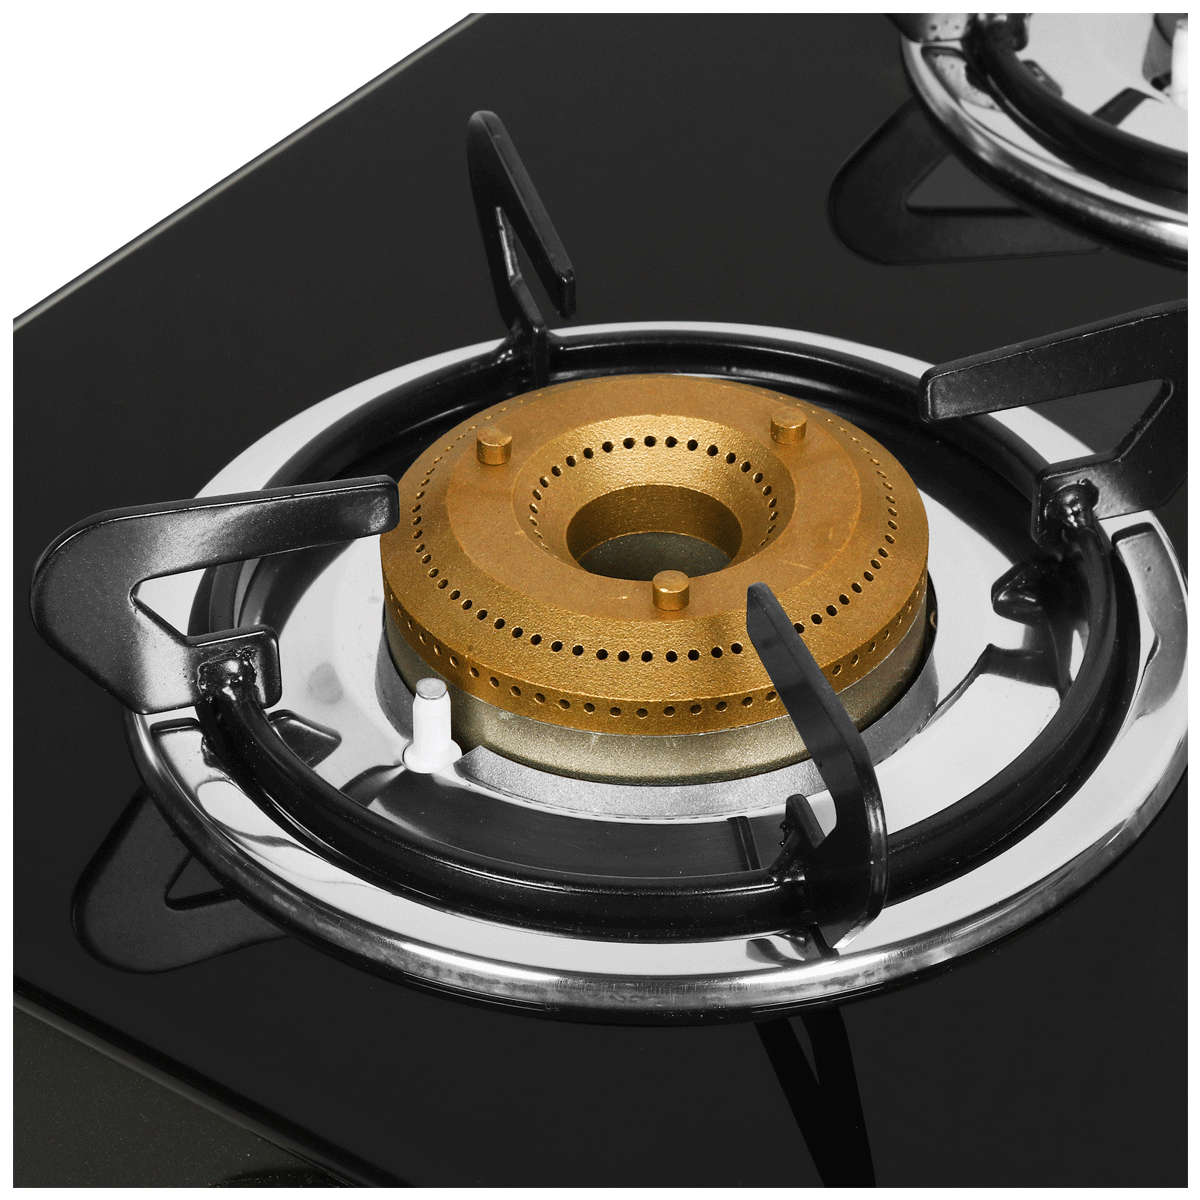 Faber Power 4BB 4 Burner Toughened Glass Gas Stove (Powder Coating Round Pan Support, 106.0629.733, Black)_3